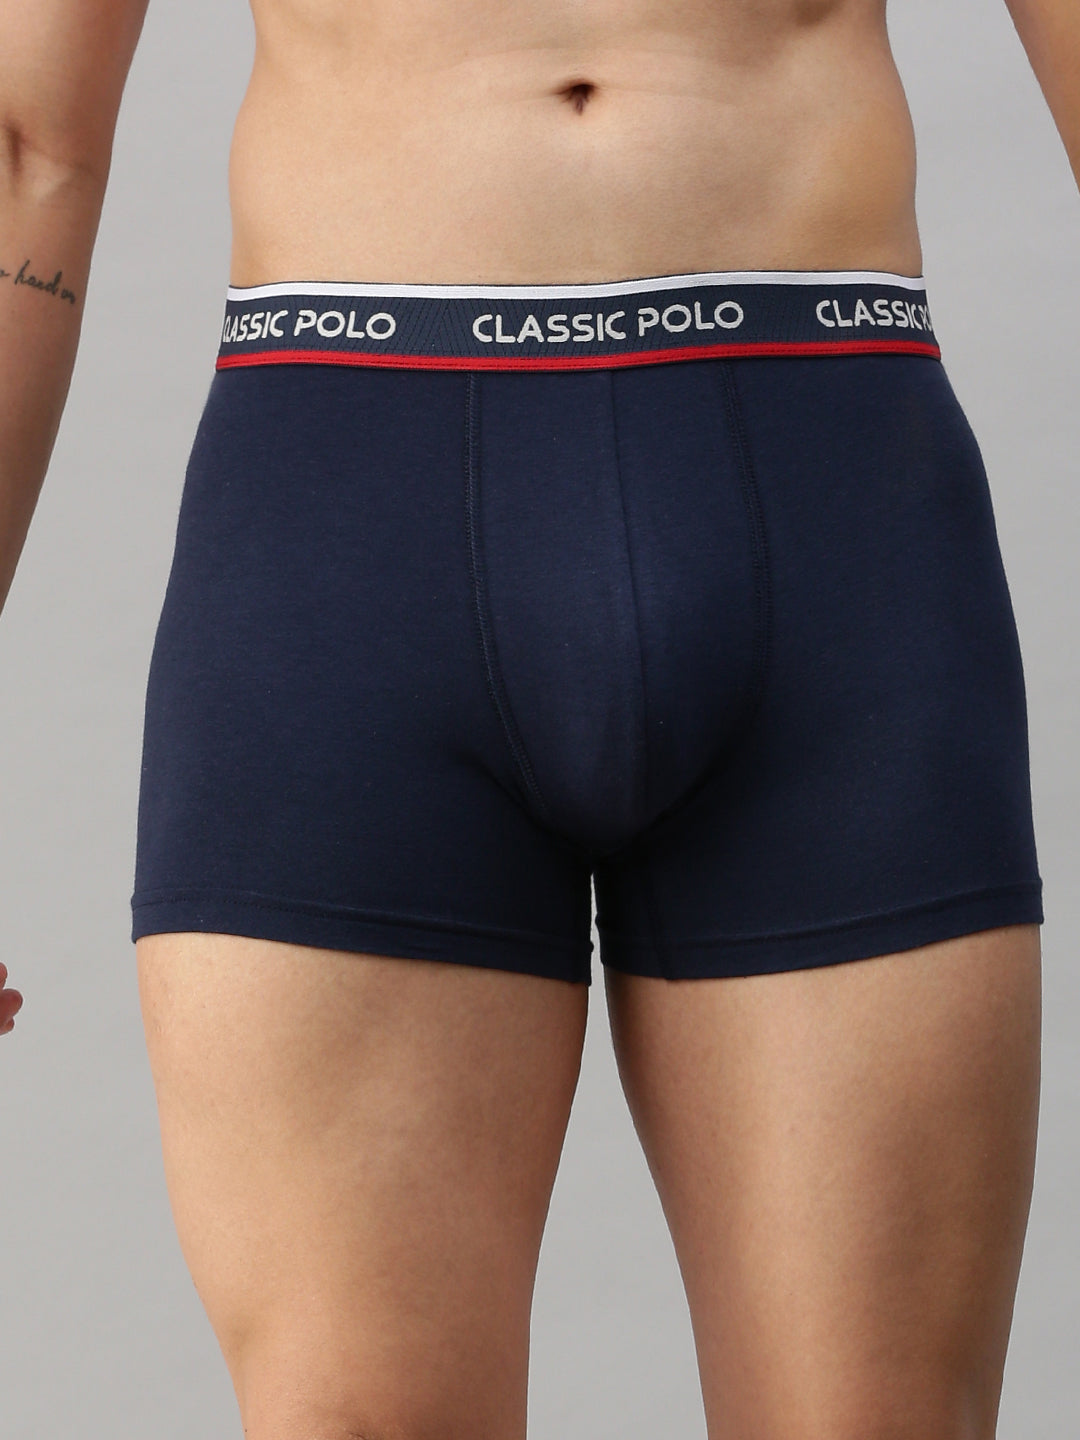 Classic Polo Men's Modal Solid Trunk | Glance - Blue